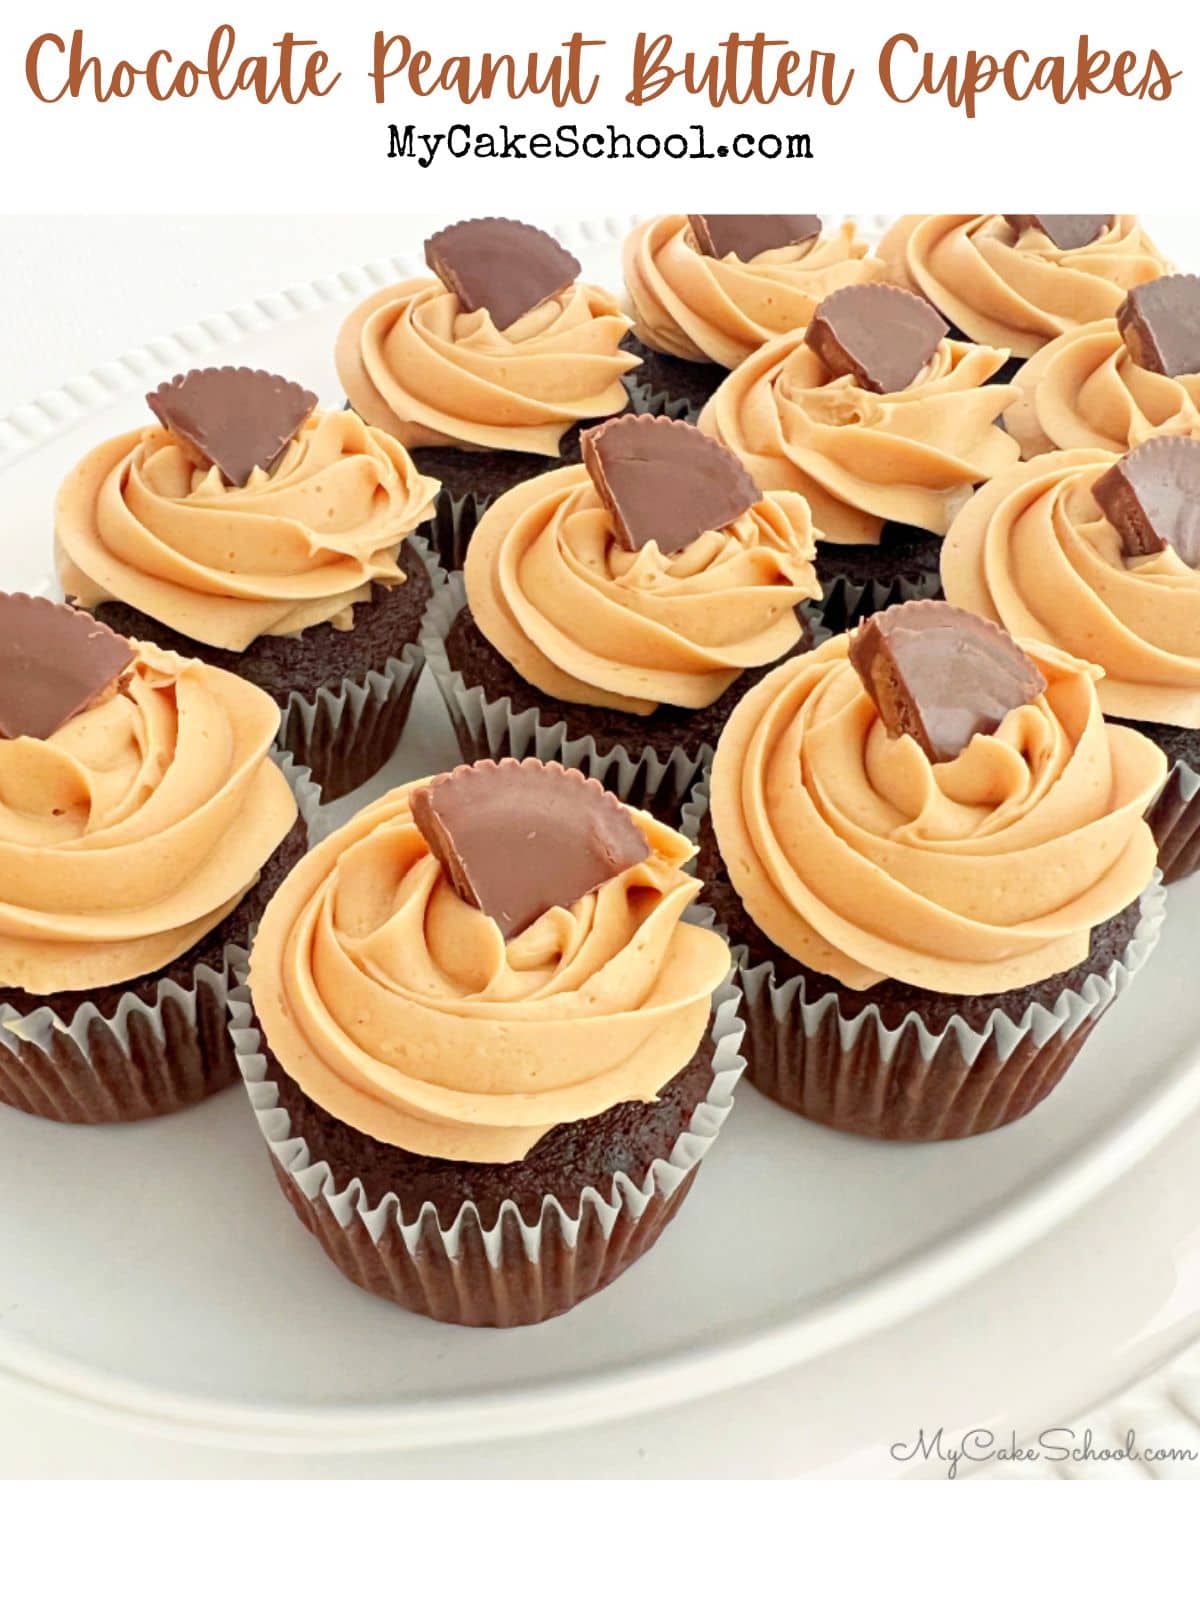 Chocolate Peanut Butter Cupcakes on a white platter